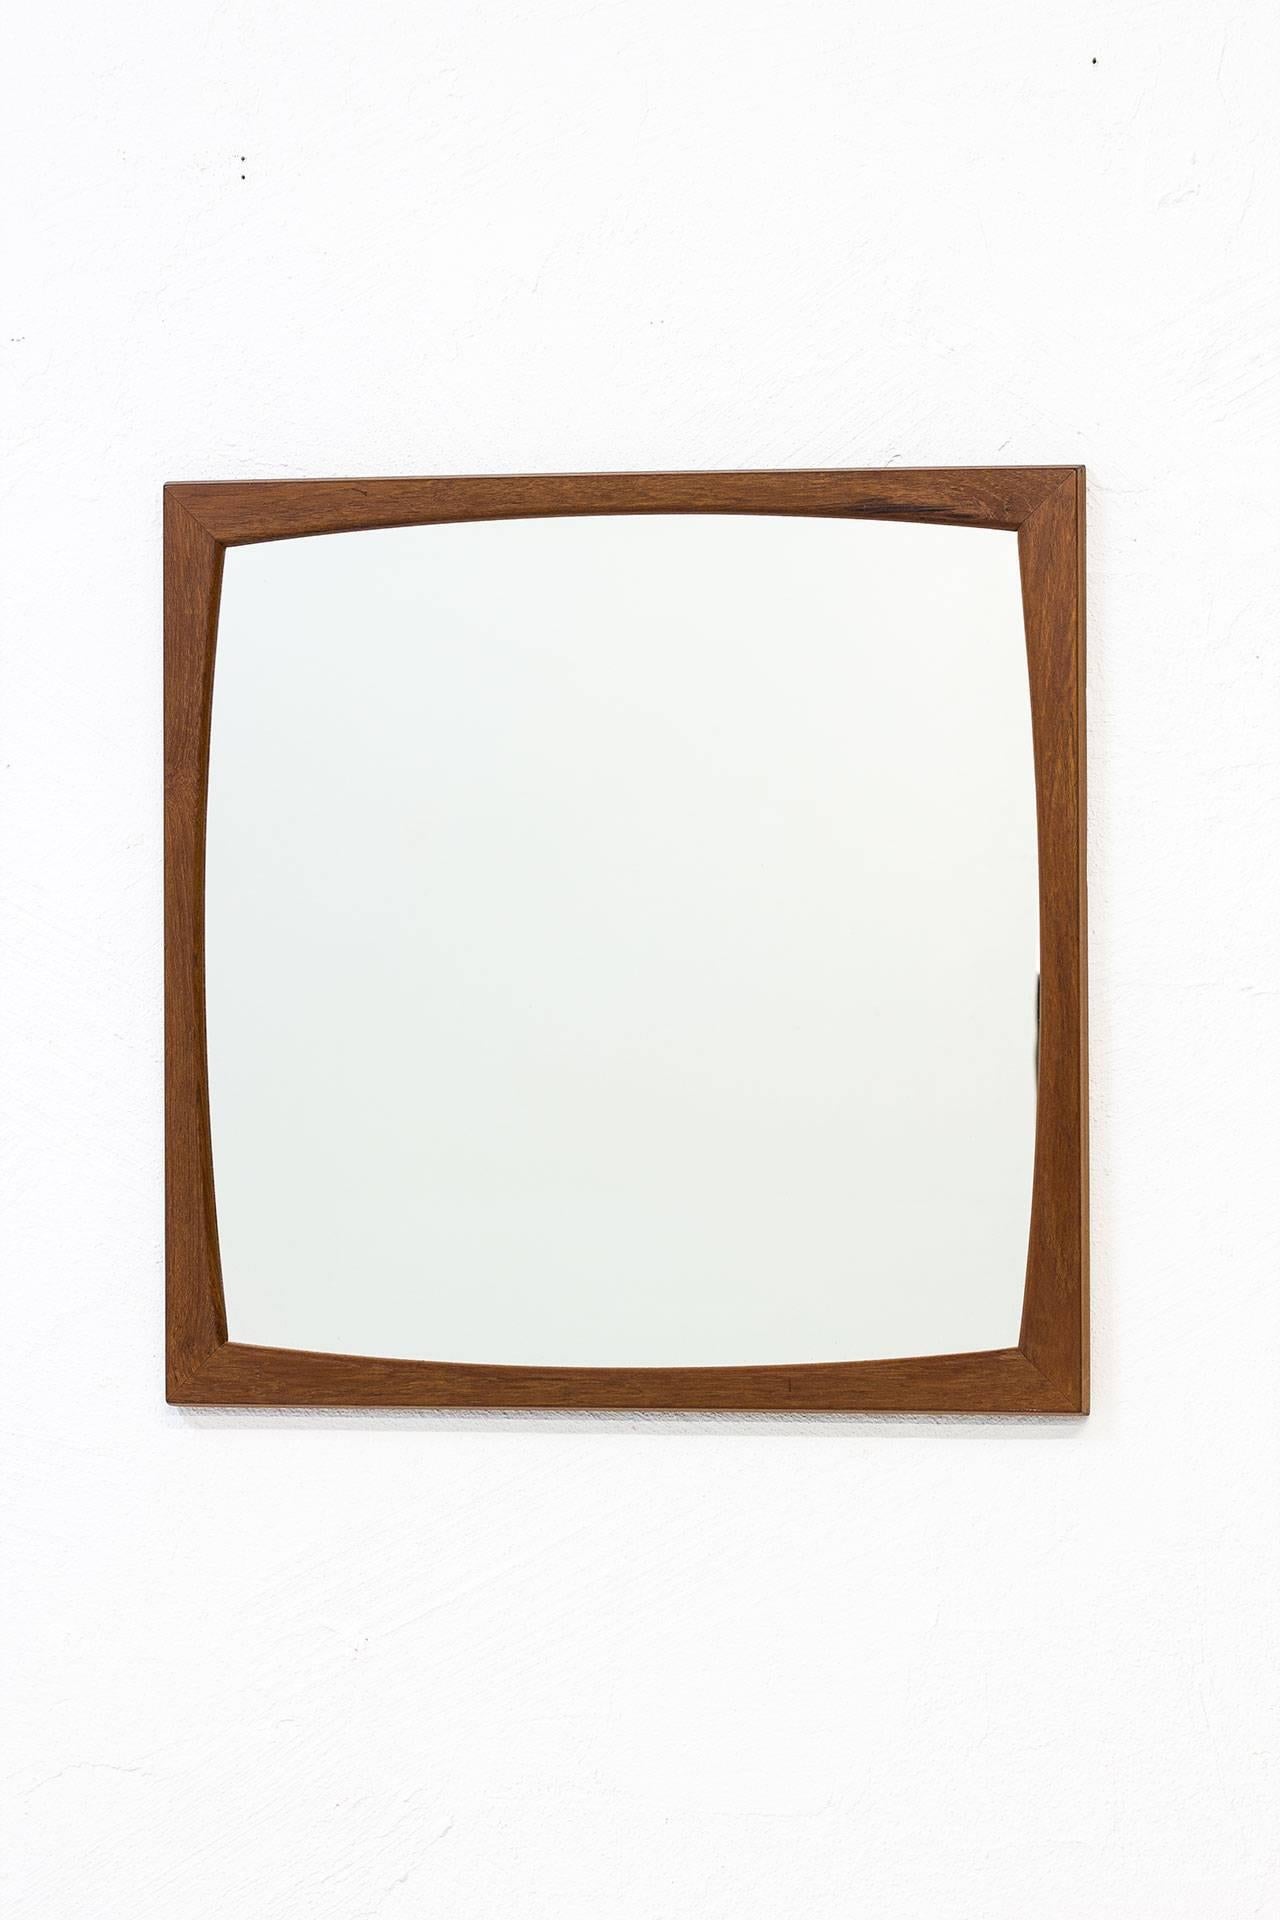 Square solid teak mirror N° 102
designed by Kai Kristiansen.
Produced in Denmark by Aksel
Kjaersgaard during the 1950s.
Signed on the back.